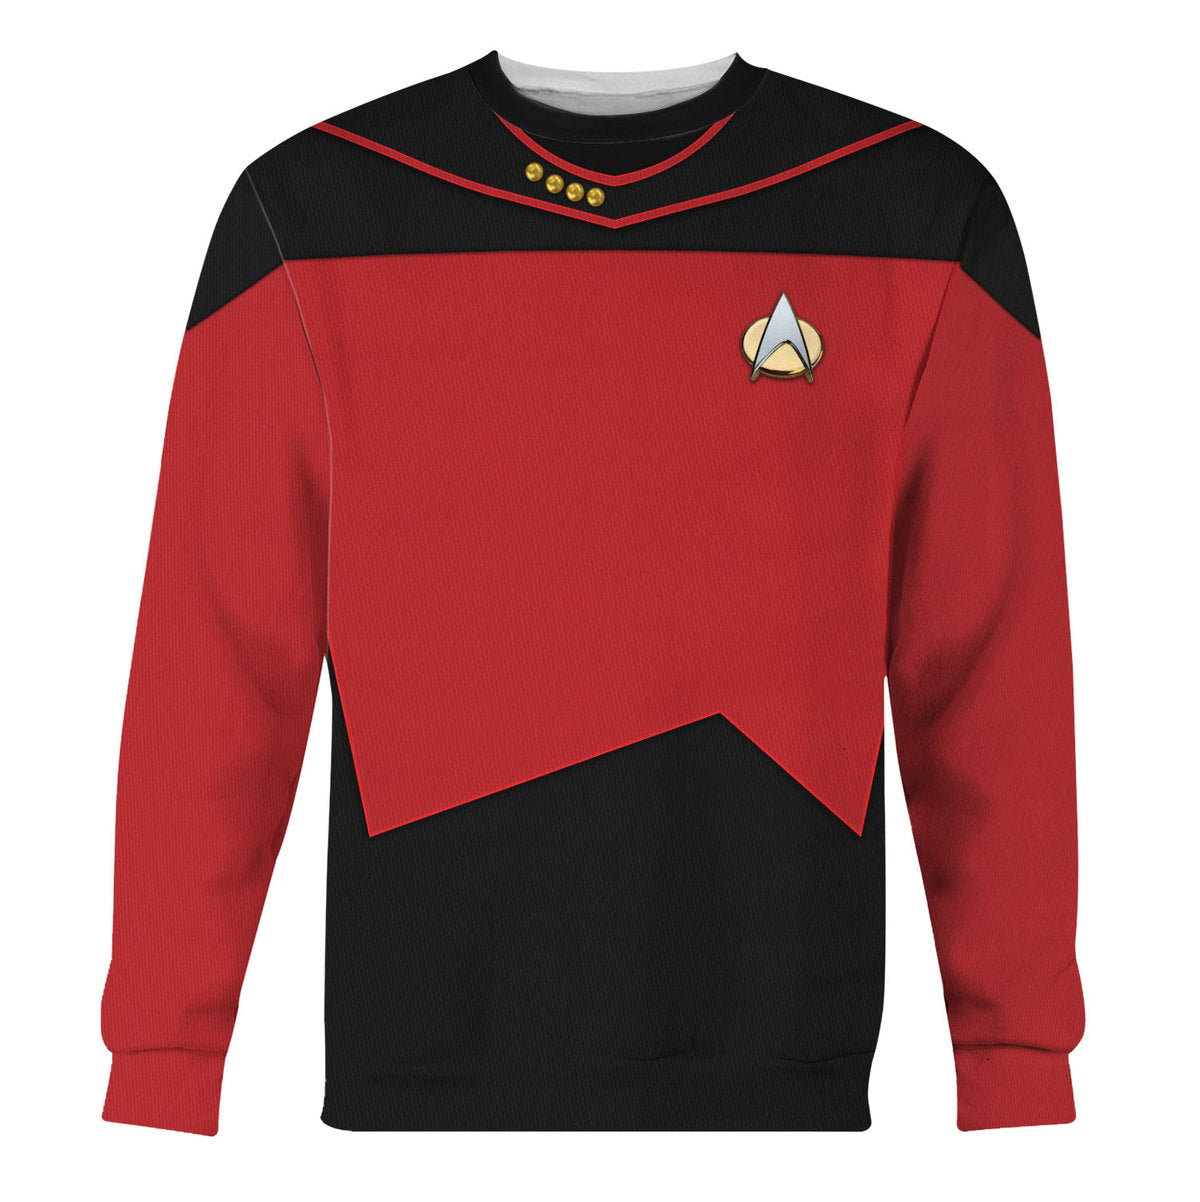 Star Trek Picard The Next Generation Red Costume Cool - Sweater - Ugly Christmas Sweater